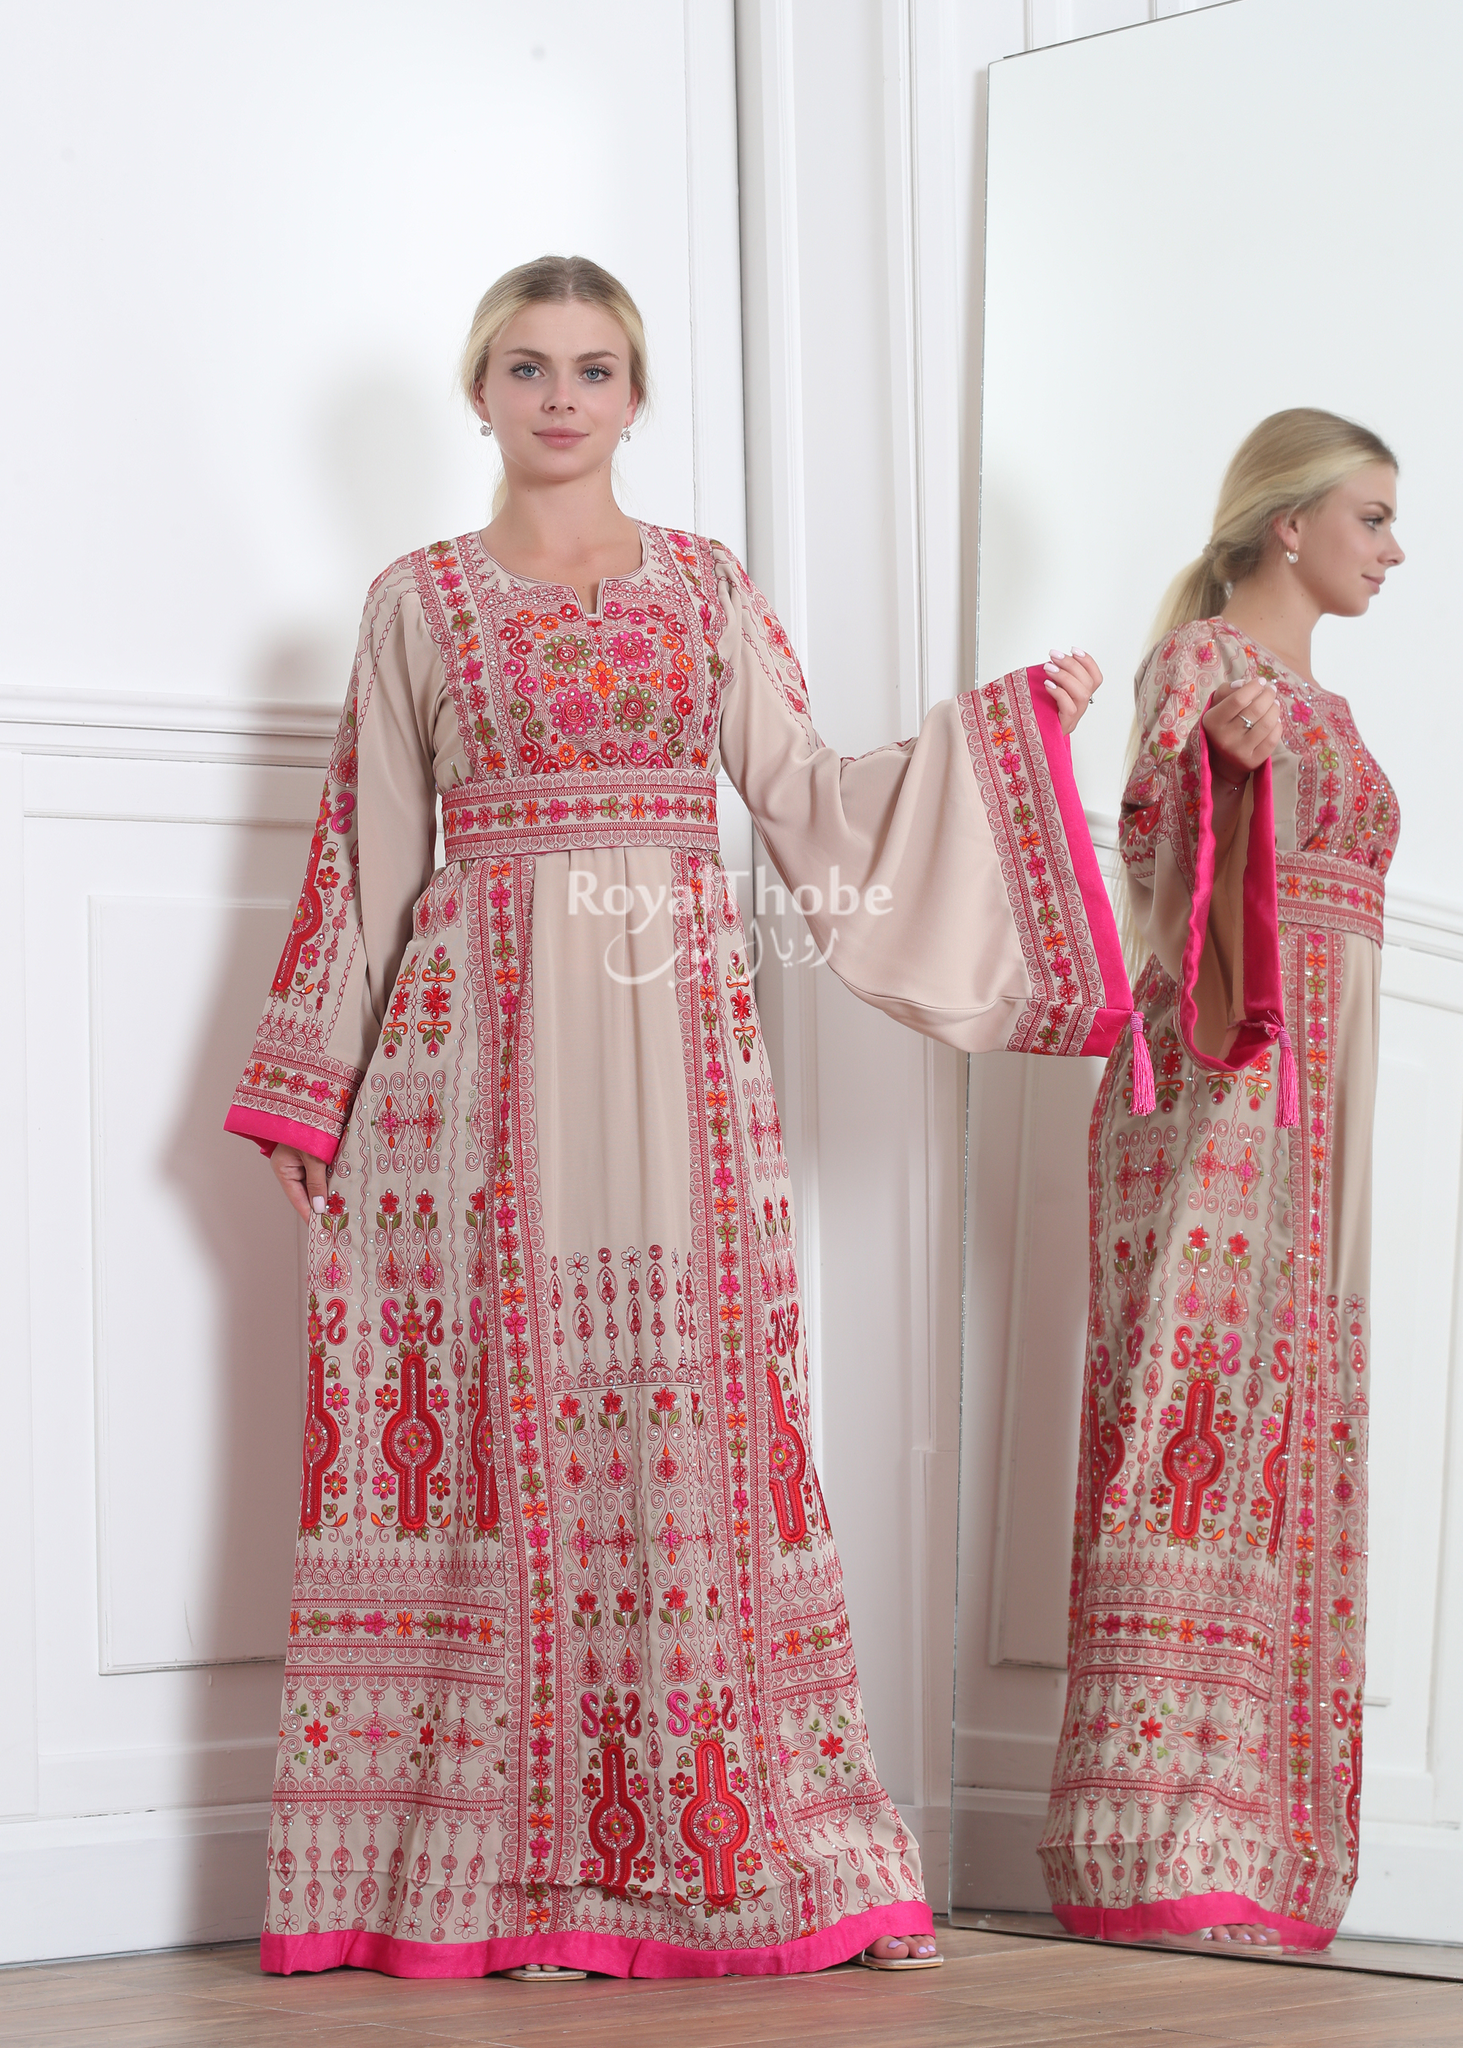 Beige/Pink Flower Maleka Long Full Embroidered Thobe With Reversible Pink Suede Belt